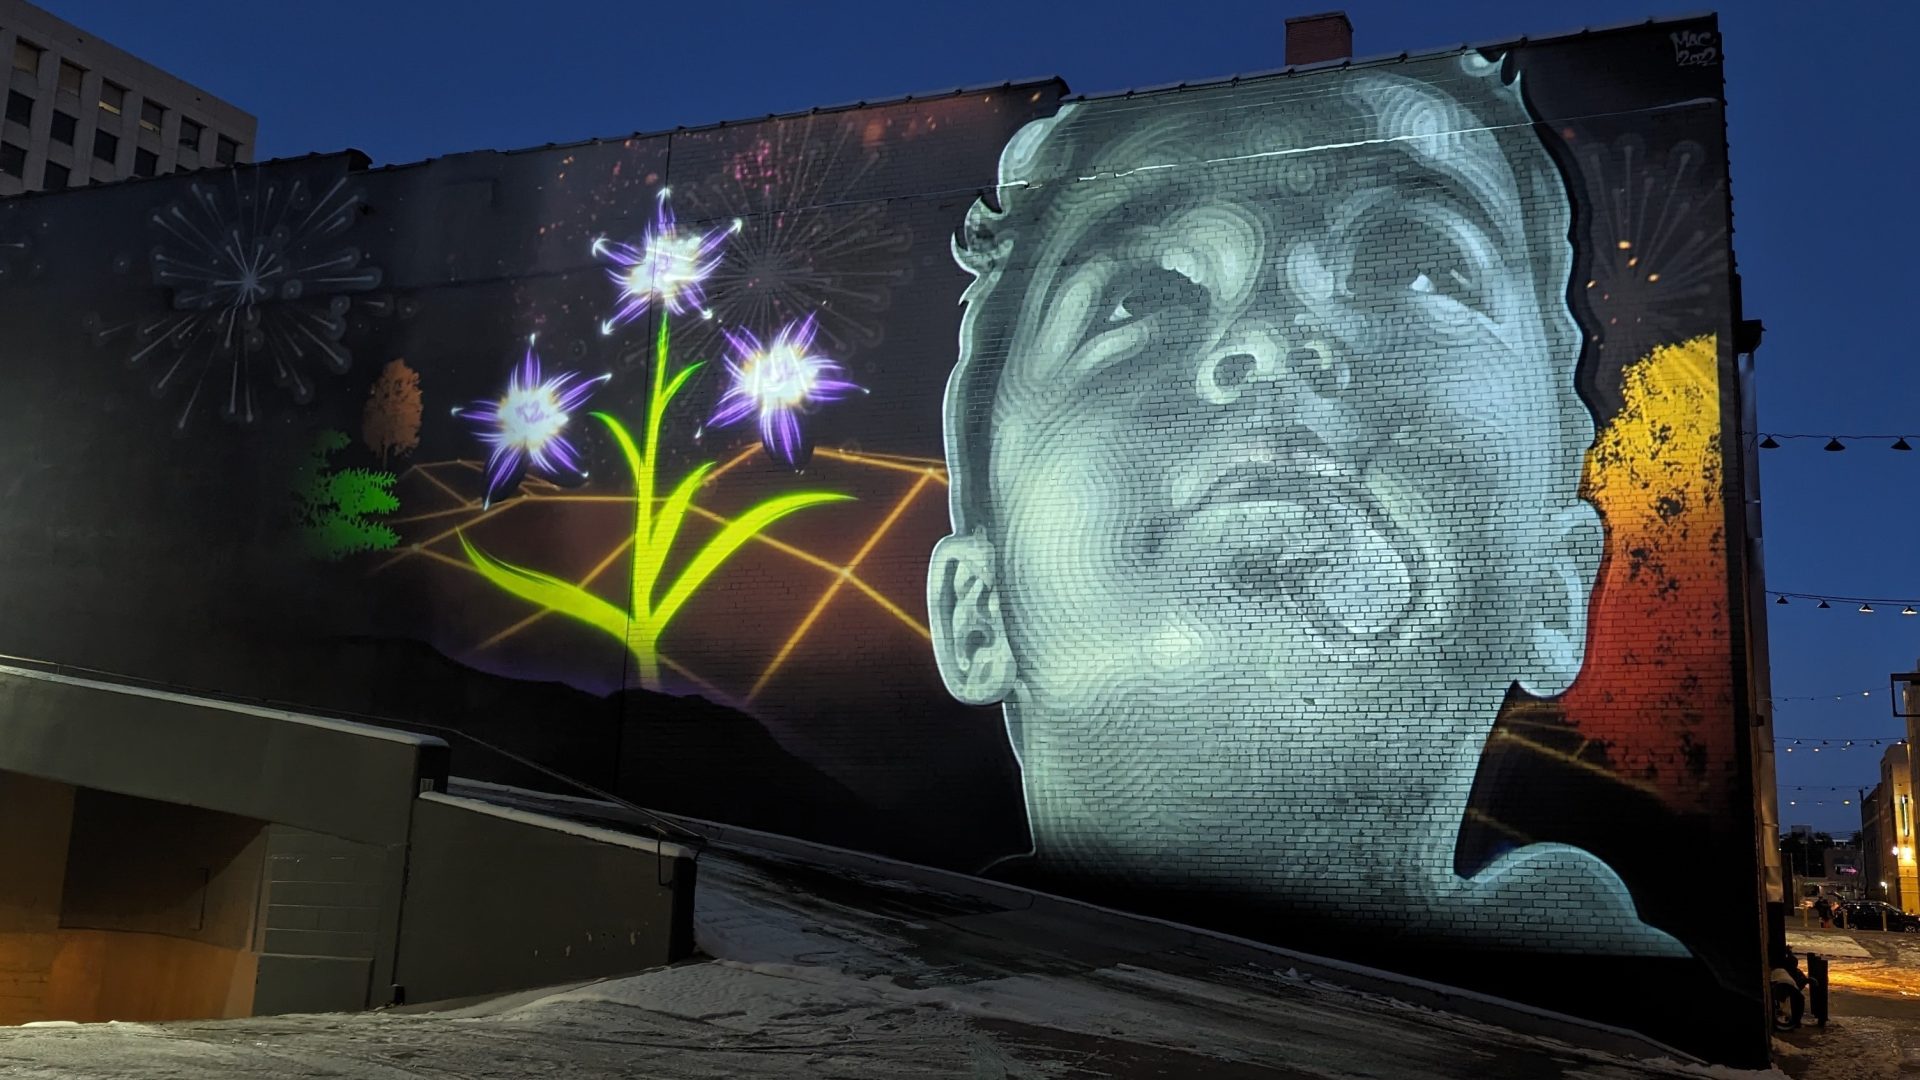 Projection mapping in AdAmAn Alley